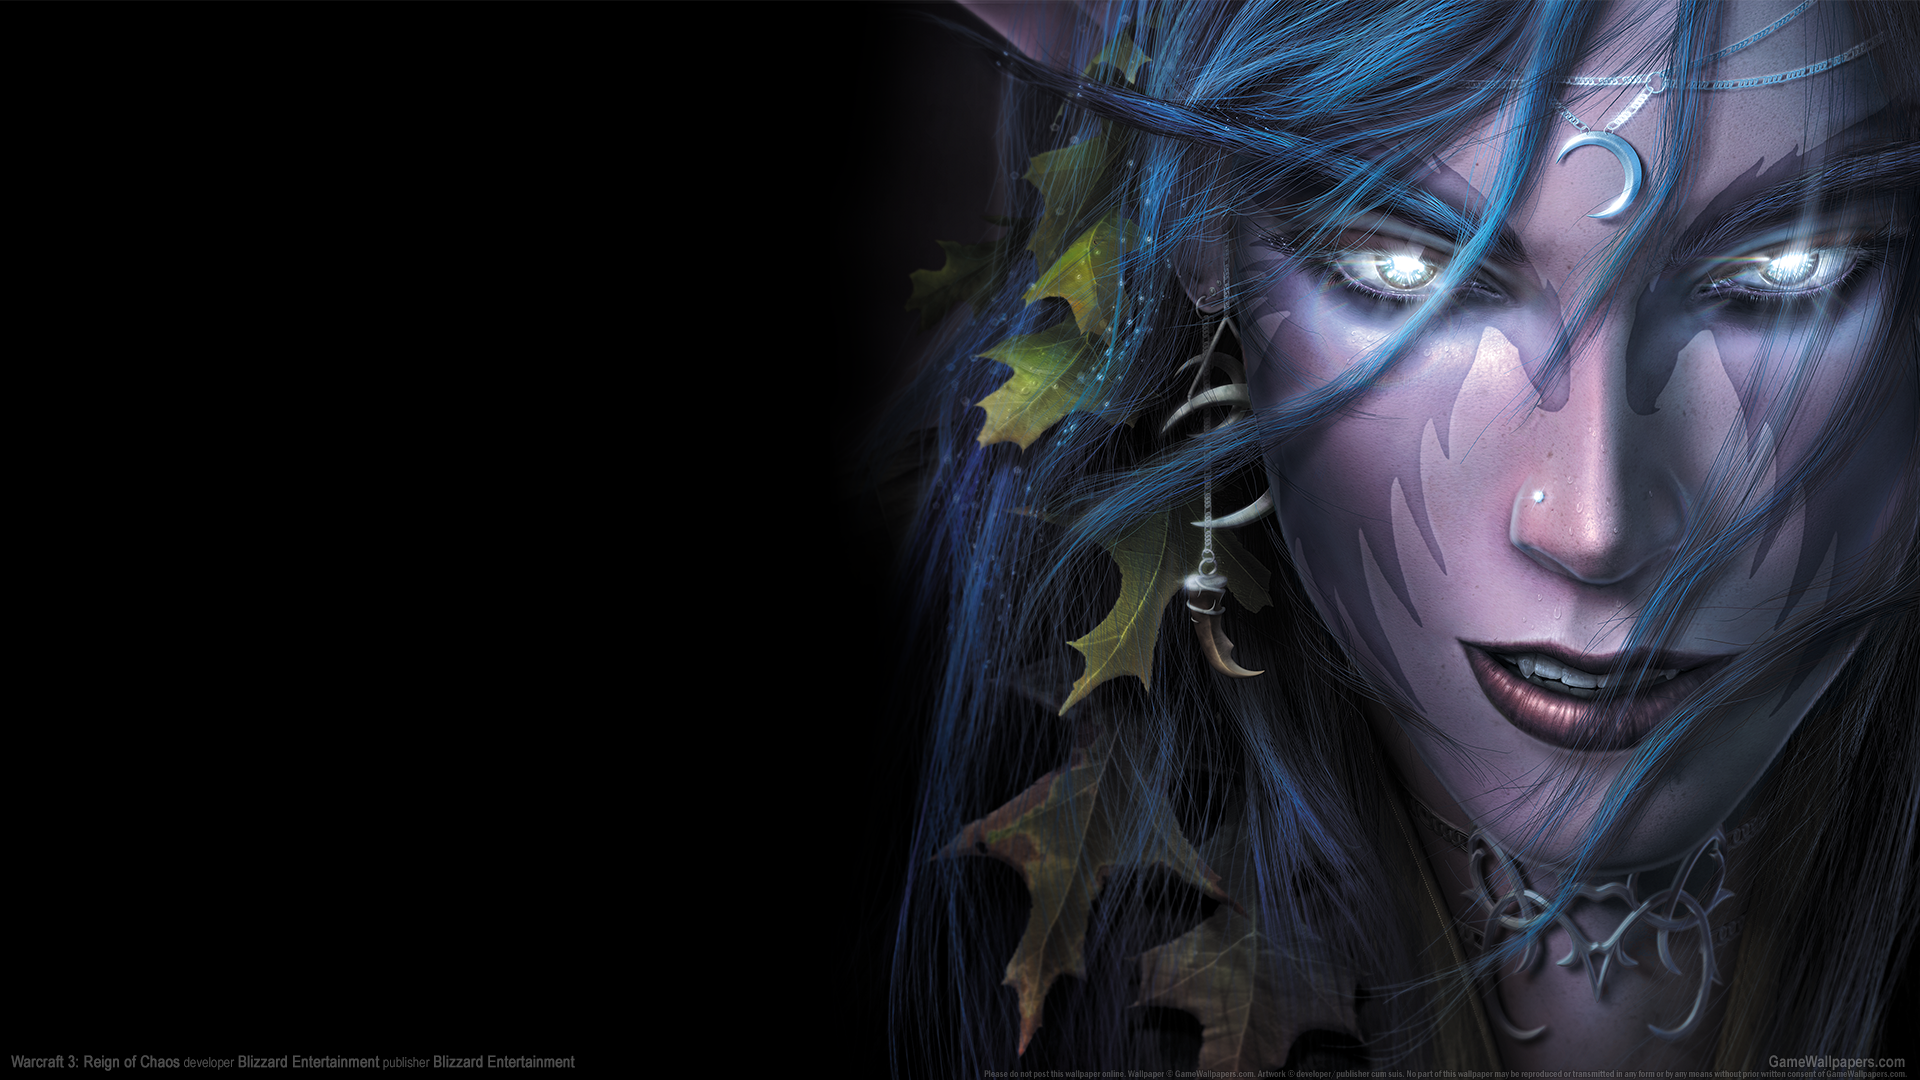 Warcraft 3: Reign of Chaos 1920x1080 wallpaper or background 23